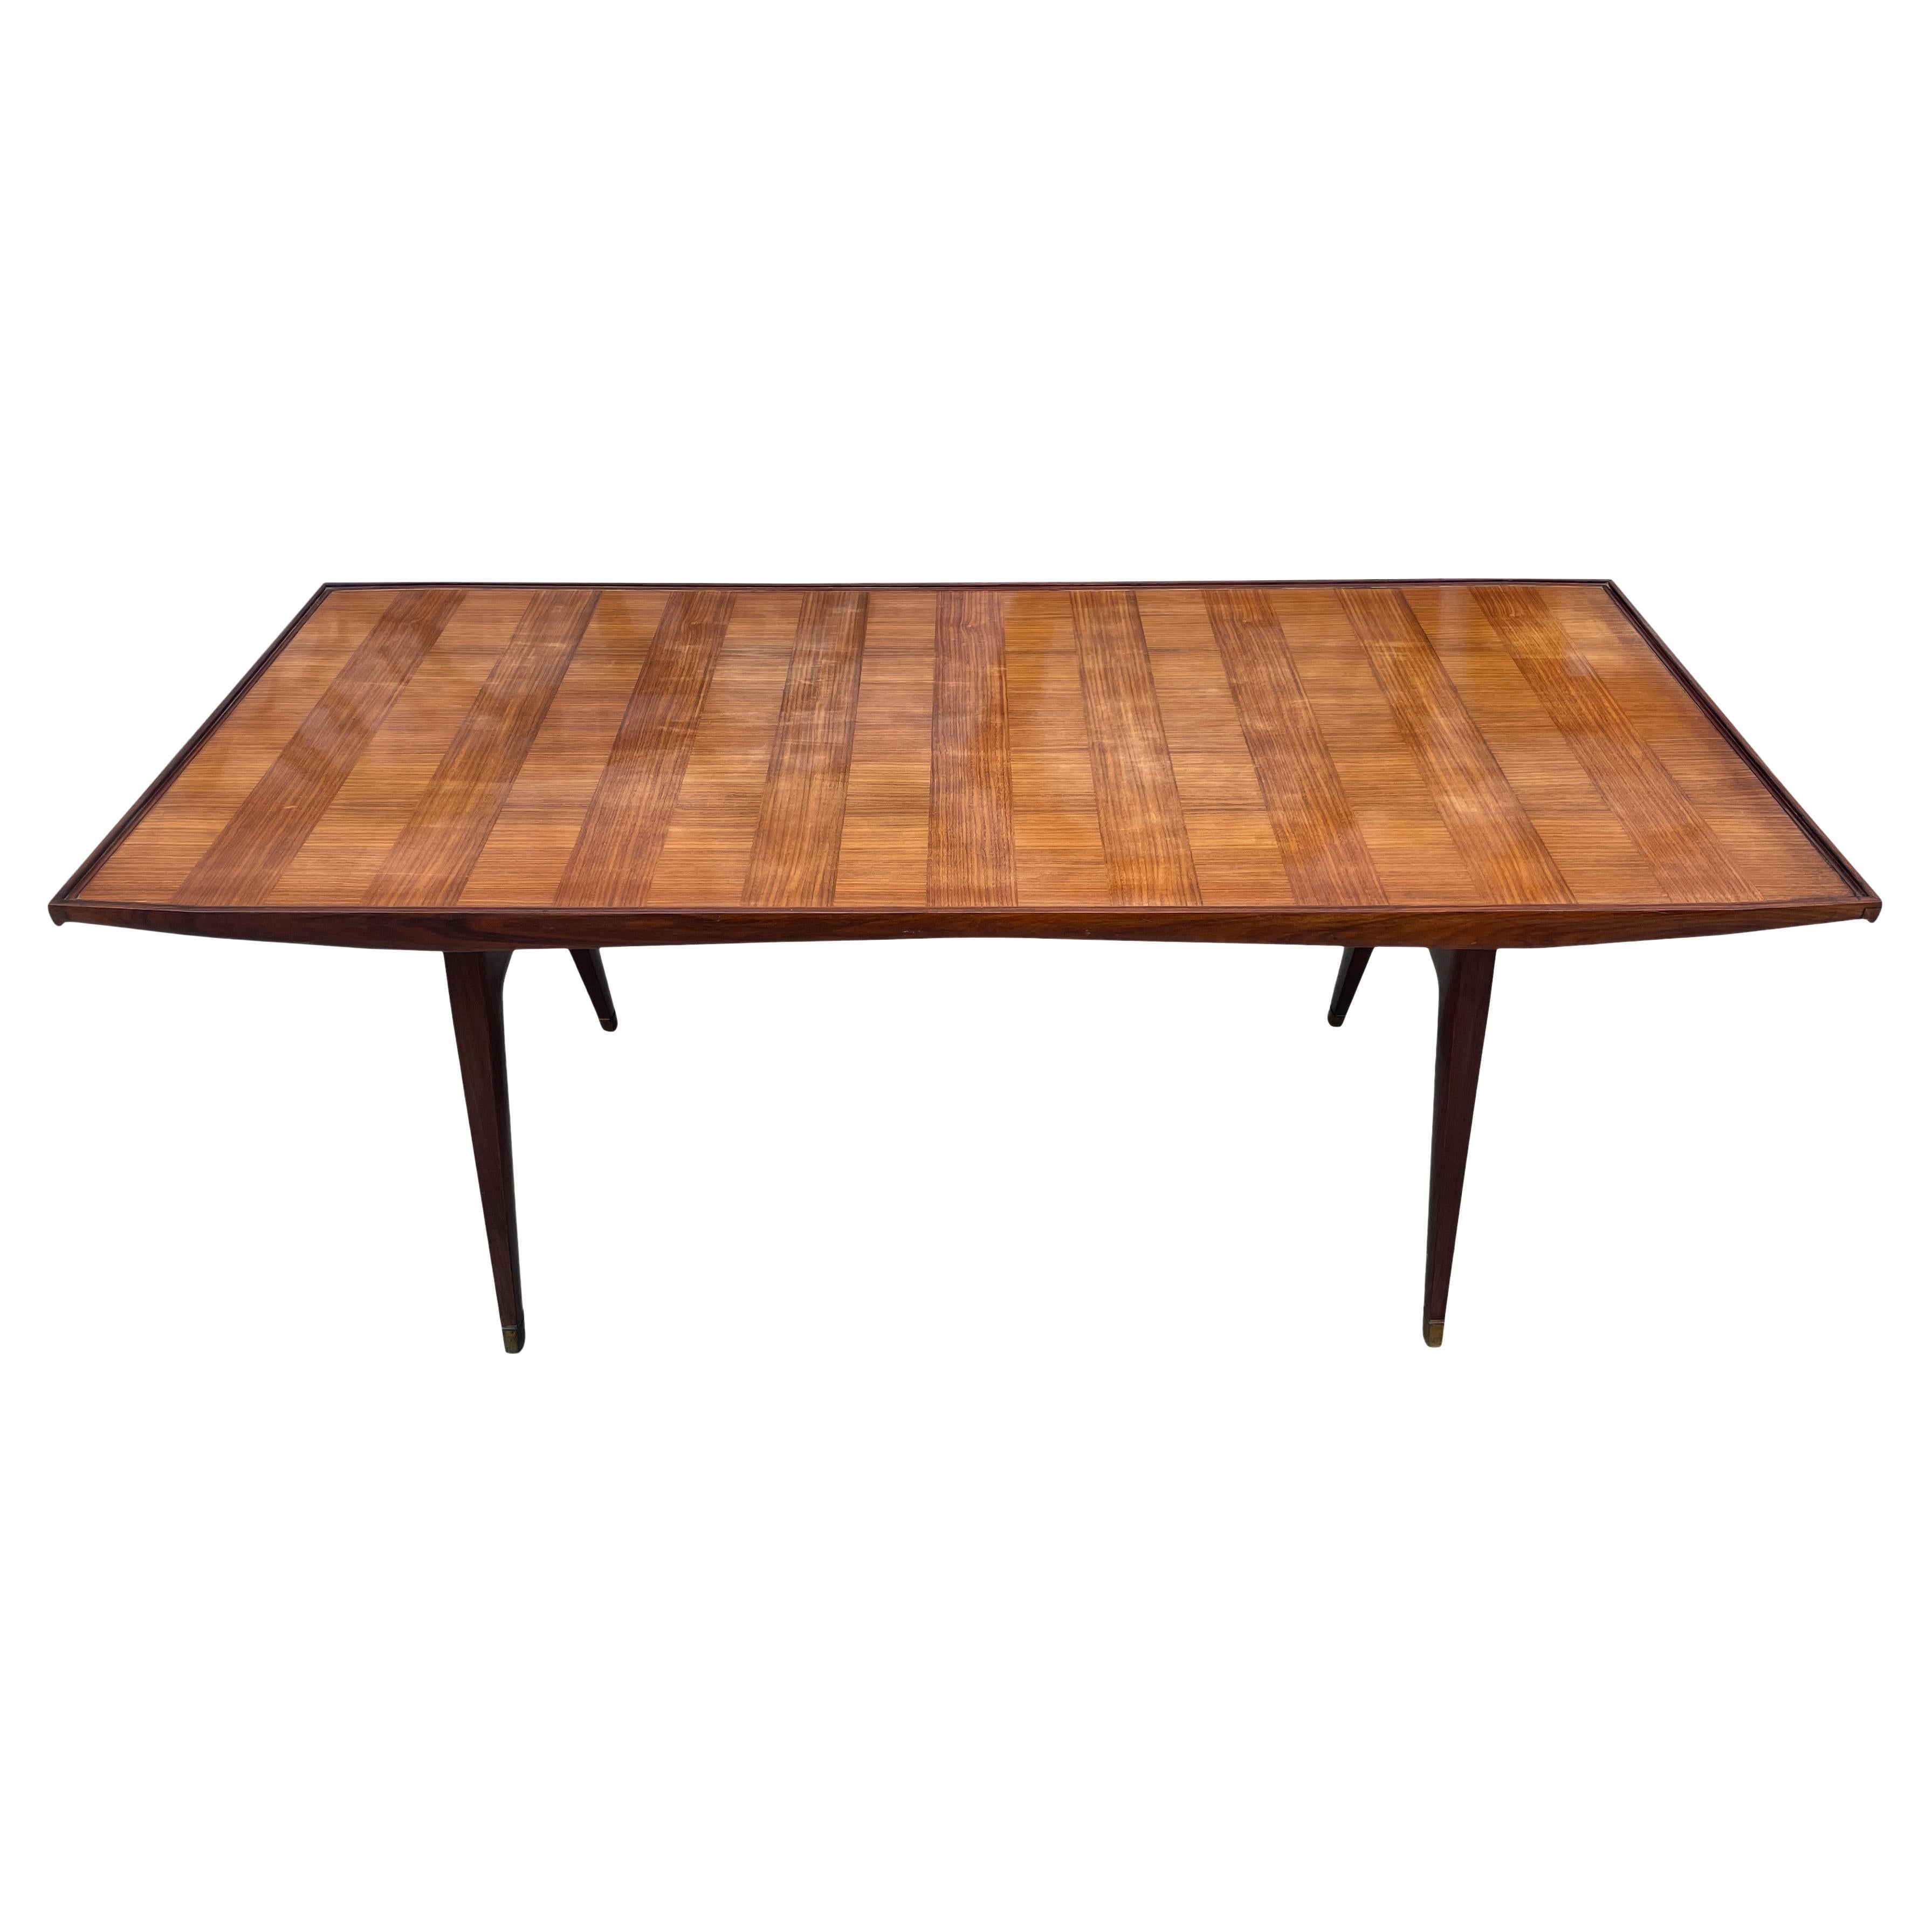 Mid-Century Modern Italian Dining Table rosewood with Glass Top Brass Feet